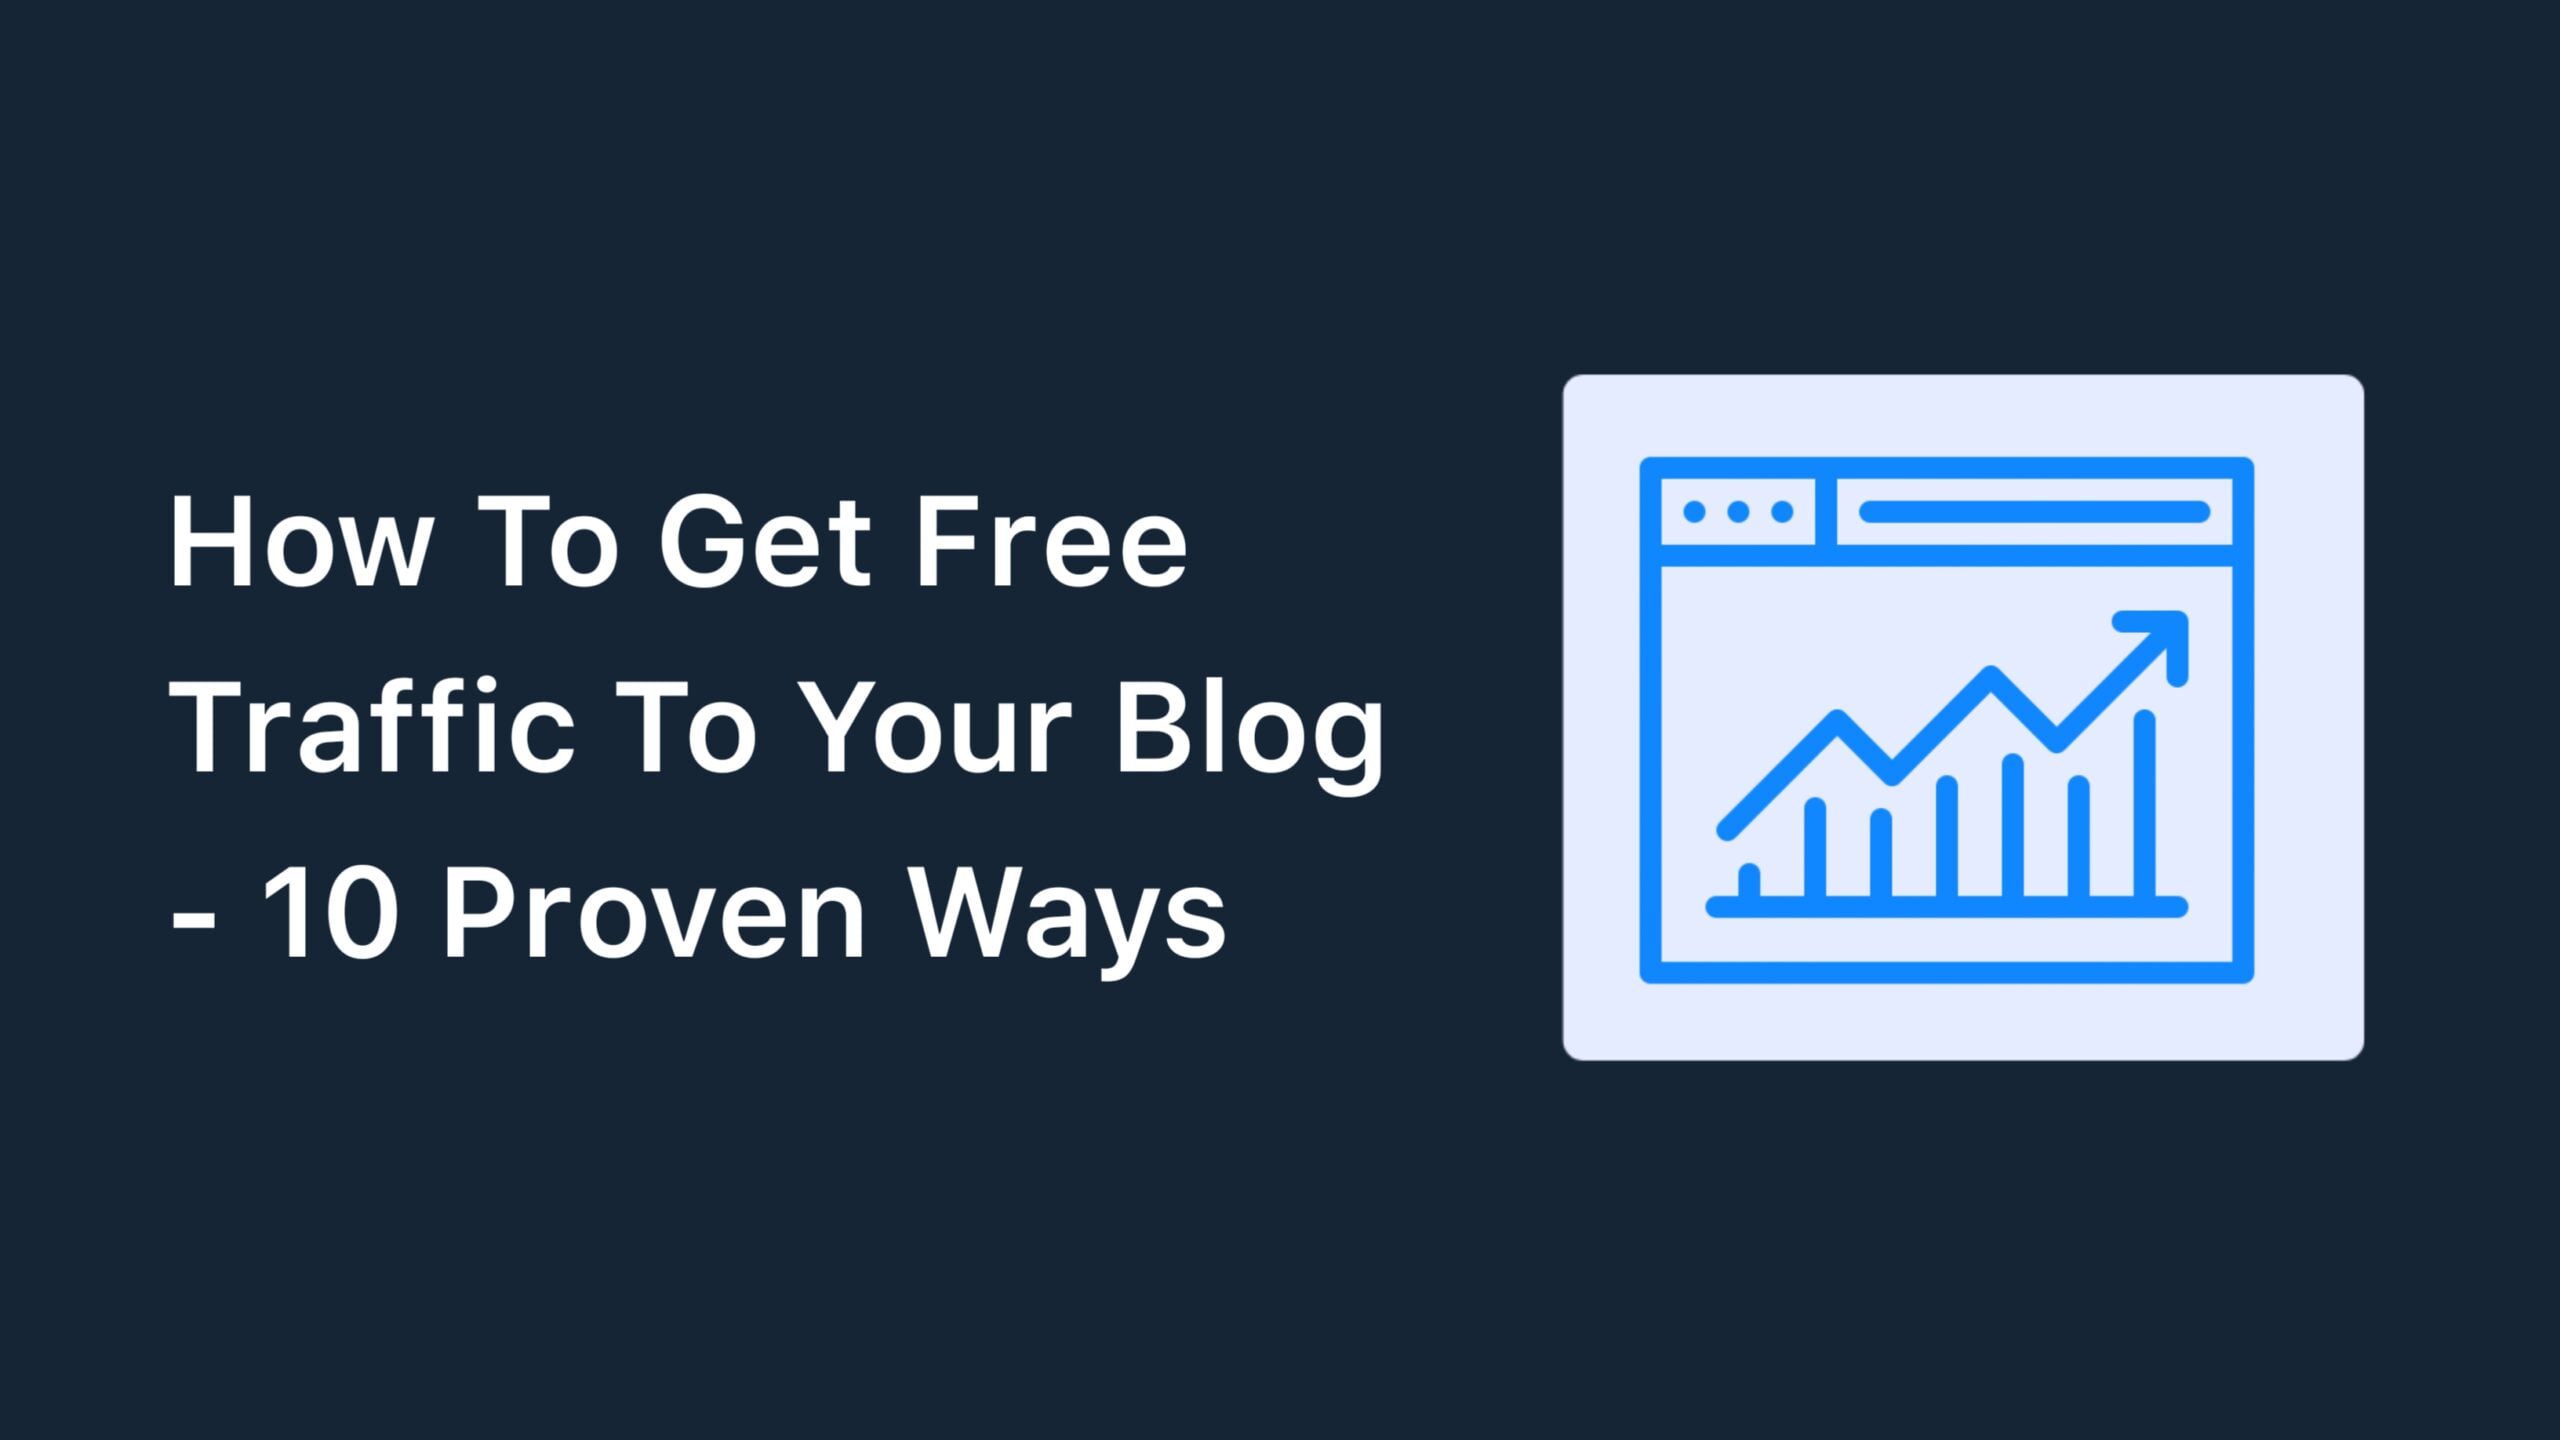 How To Get Free Traffic To Your Blog - 10 Proven Ways